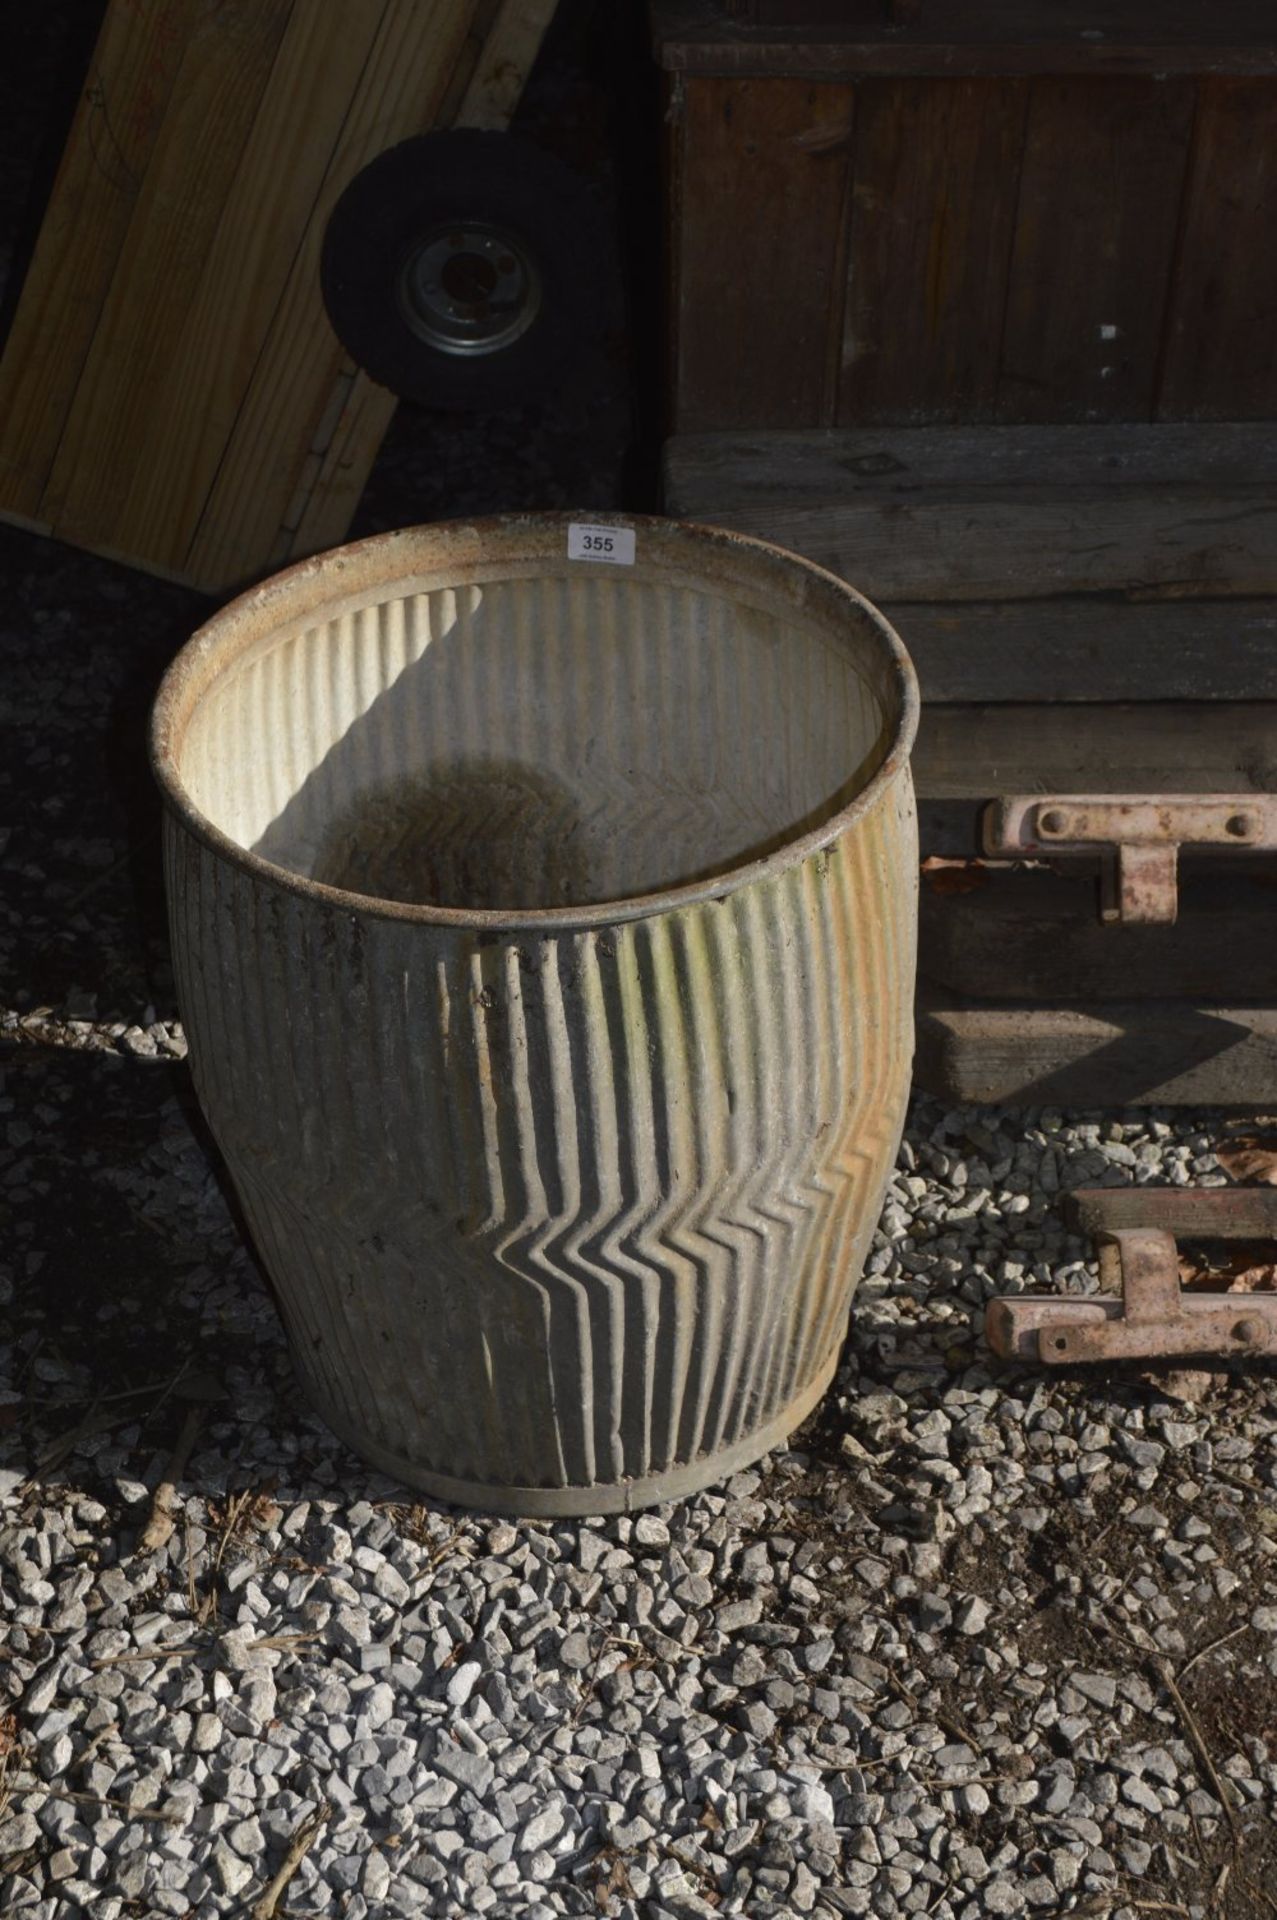 A dolly tub, diameter approx. 18".